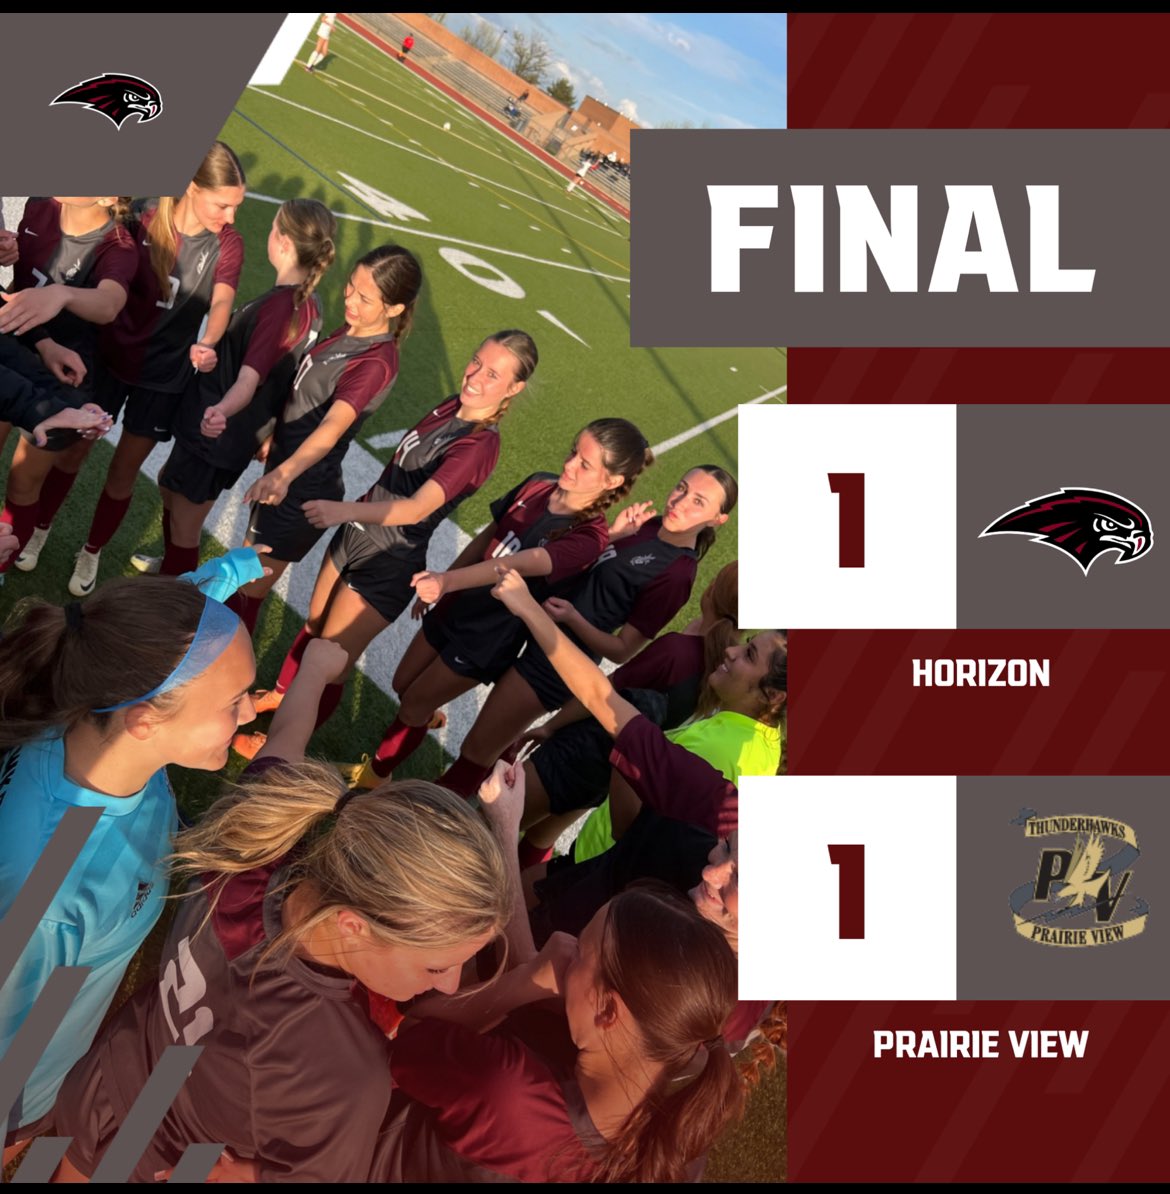 In their final game of the season, #HawkNation Girls Soccer ties Prairie View 1-1! This special group of seniors will be missed! Have always loved watching you compete! Thank you, seniors!